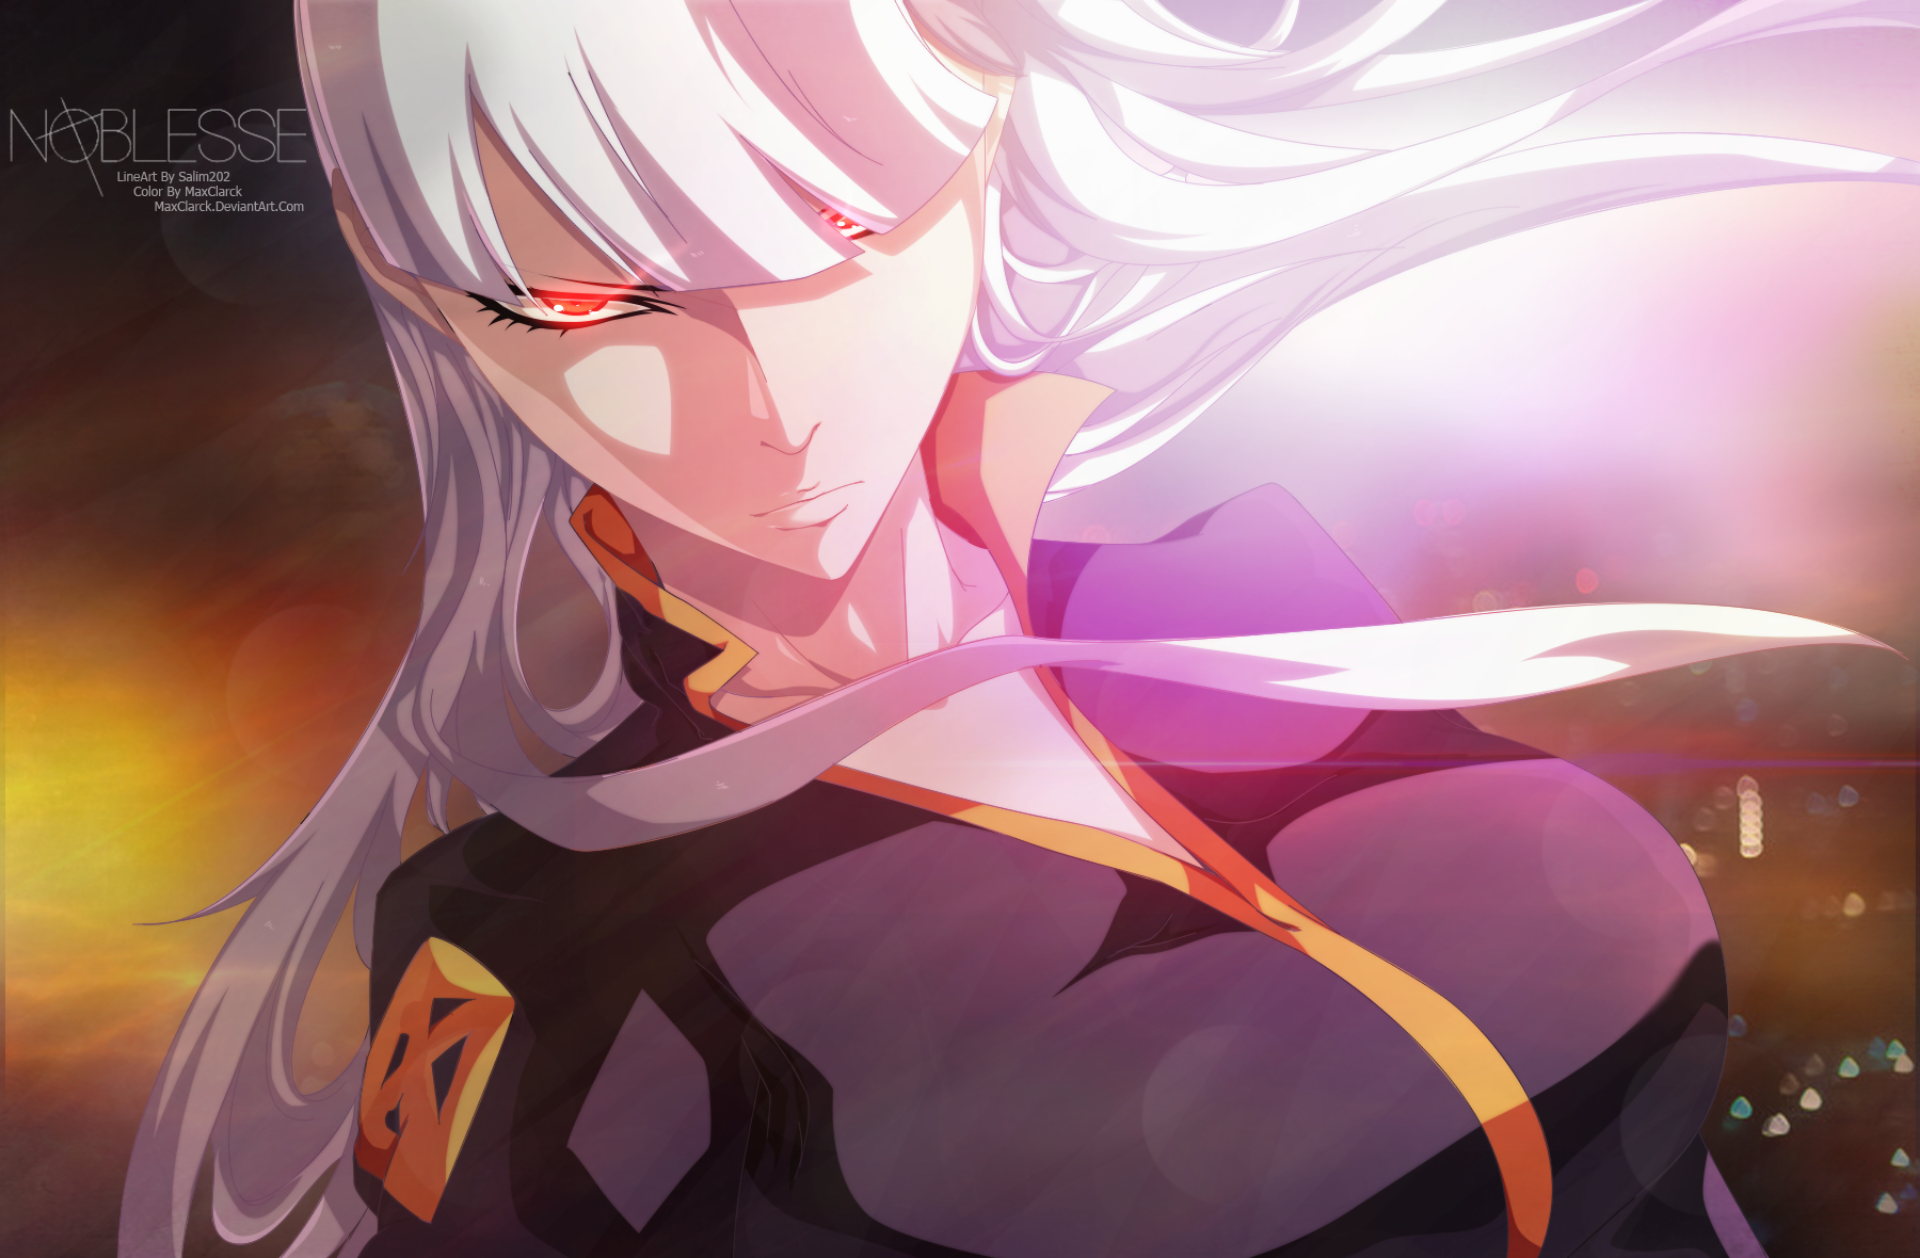 Anime Noblesse HD Wallpaper by Getaxy